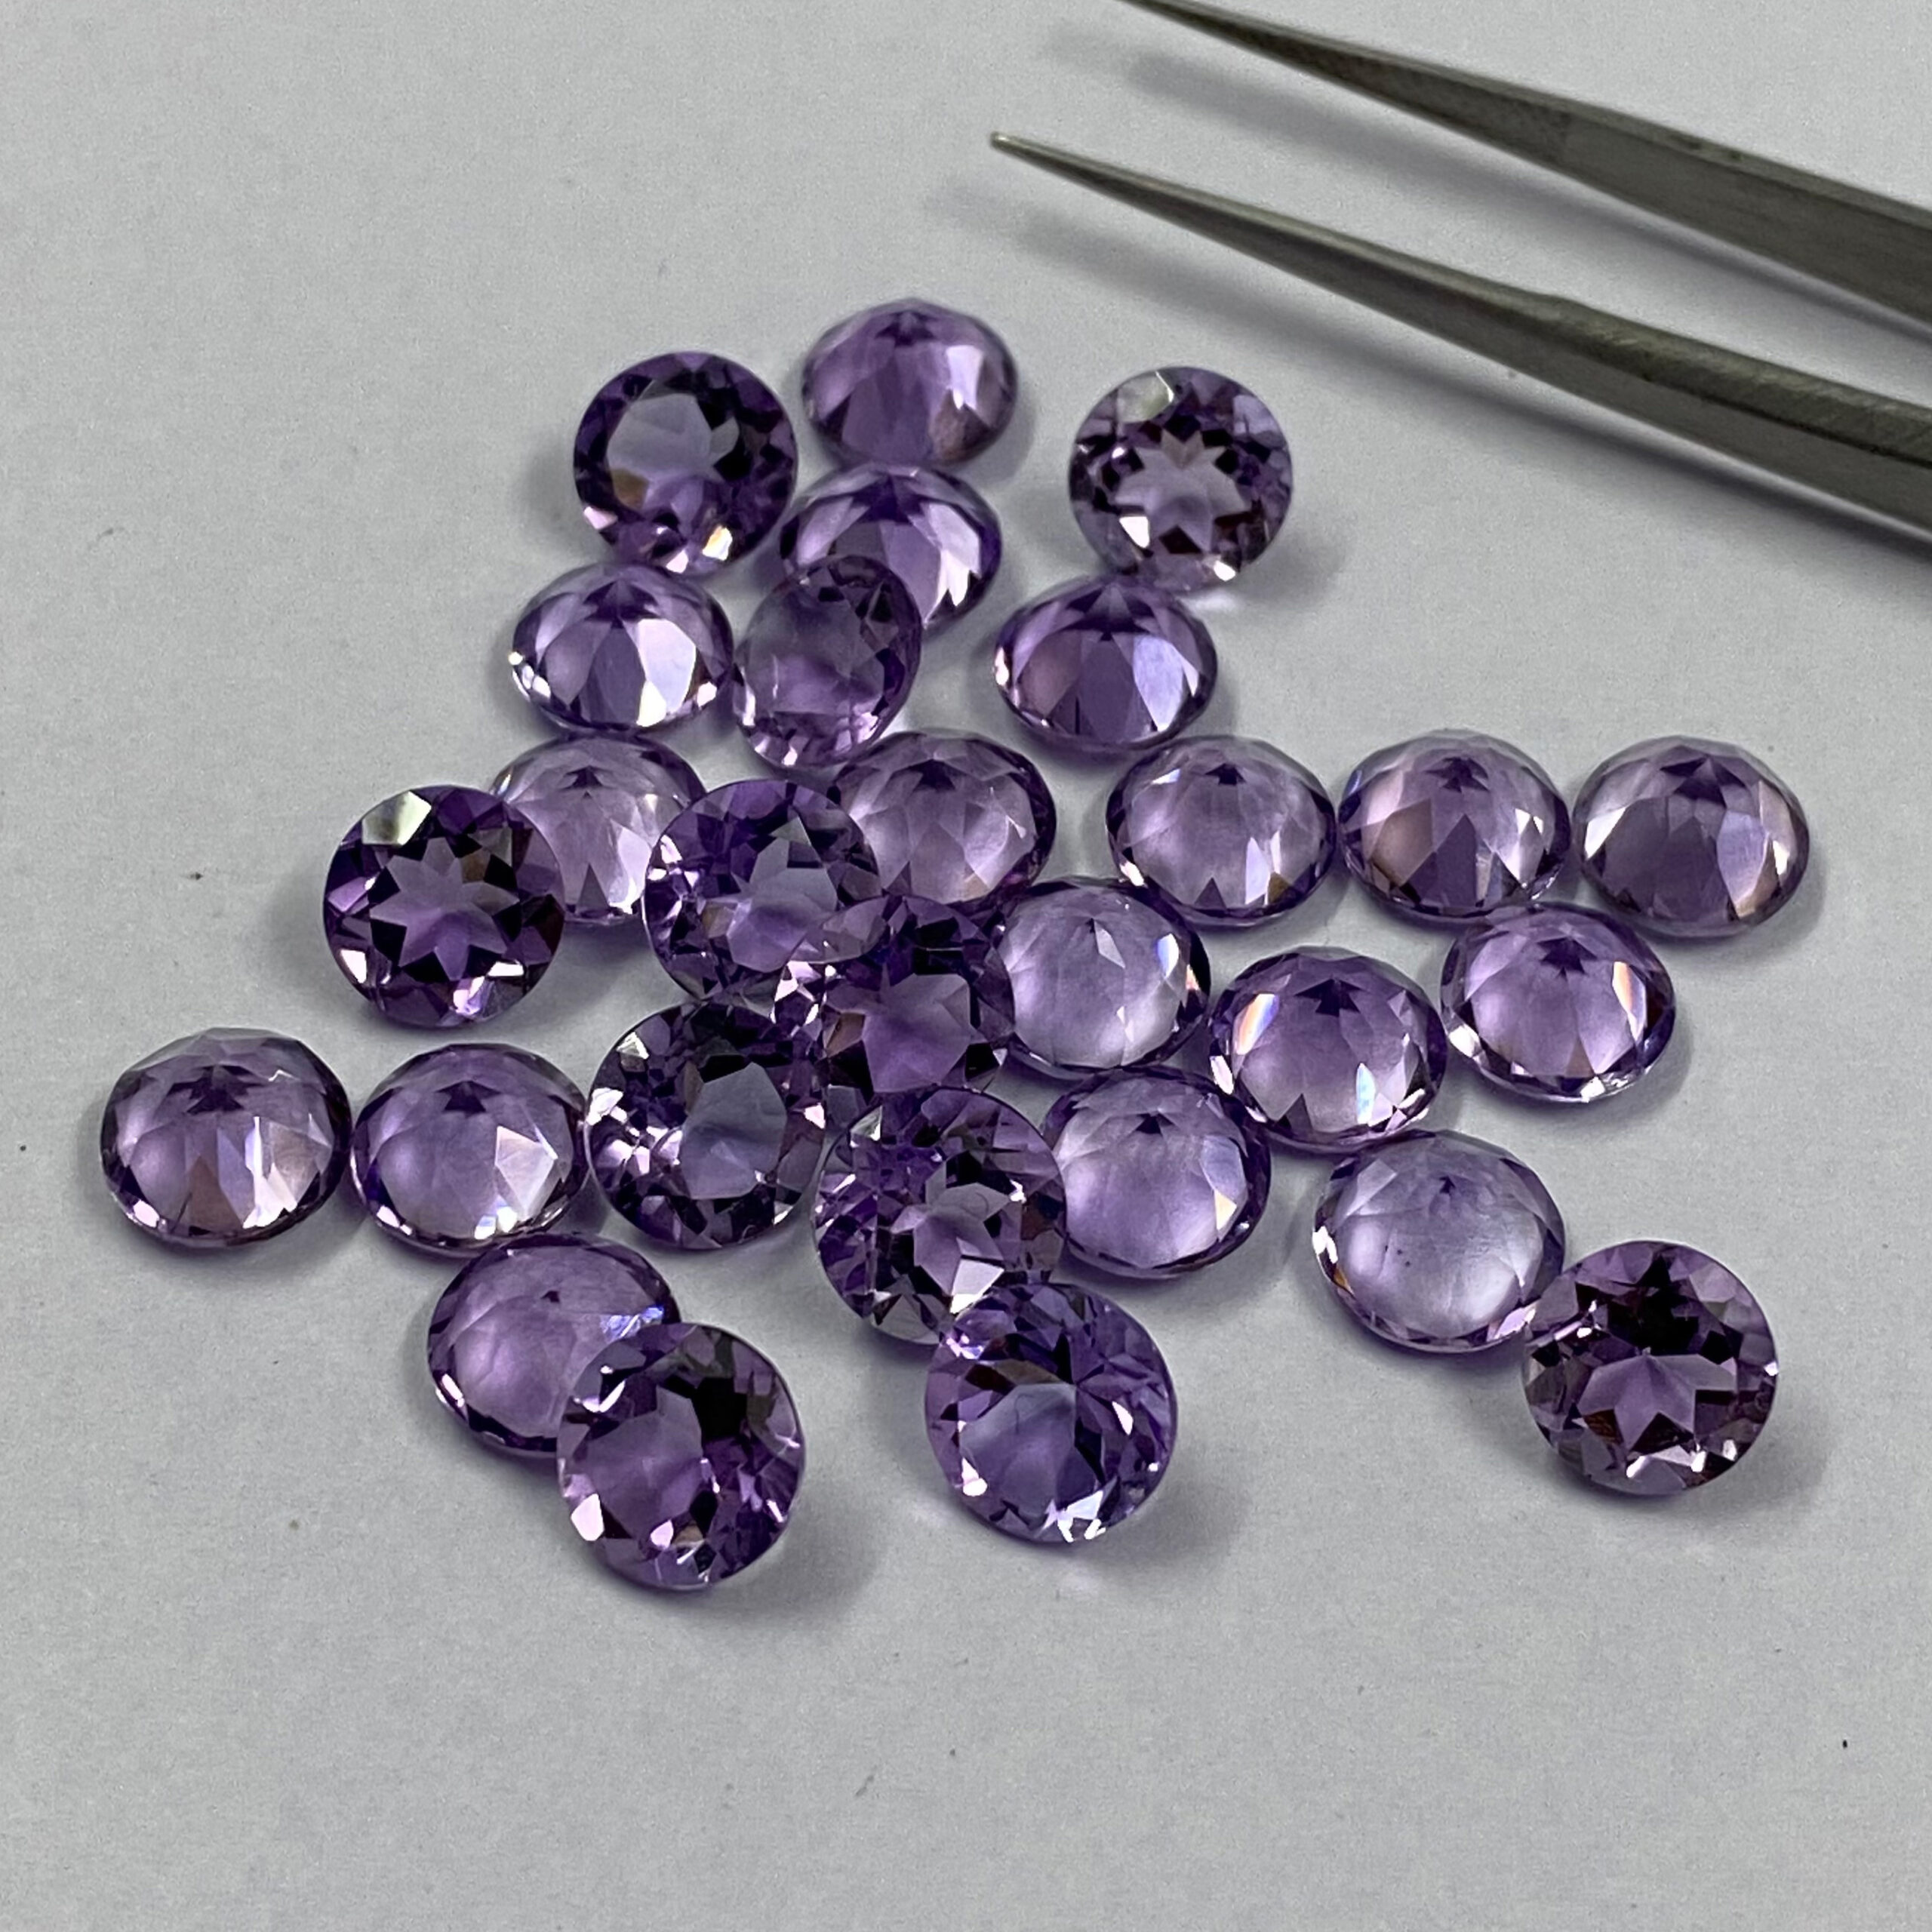 Wholesale Lot of 10mm Round Facet Natural Amethyst Loose Calibrated Gemstone 